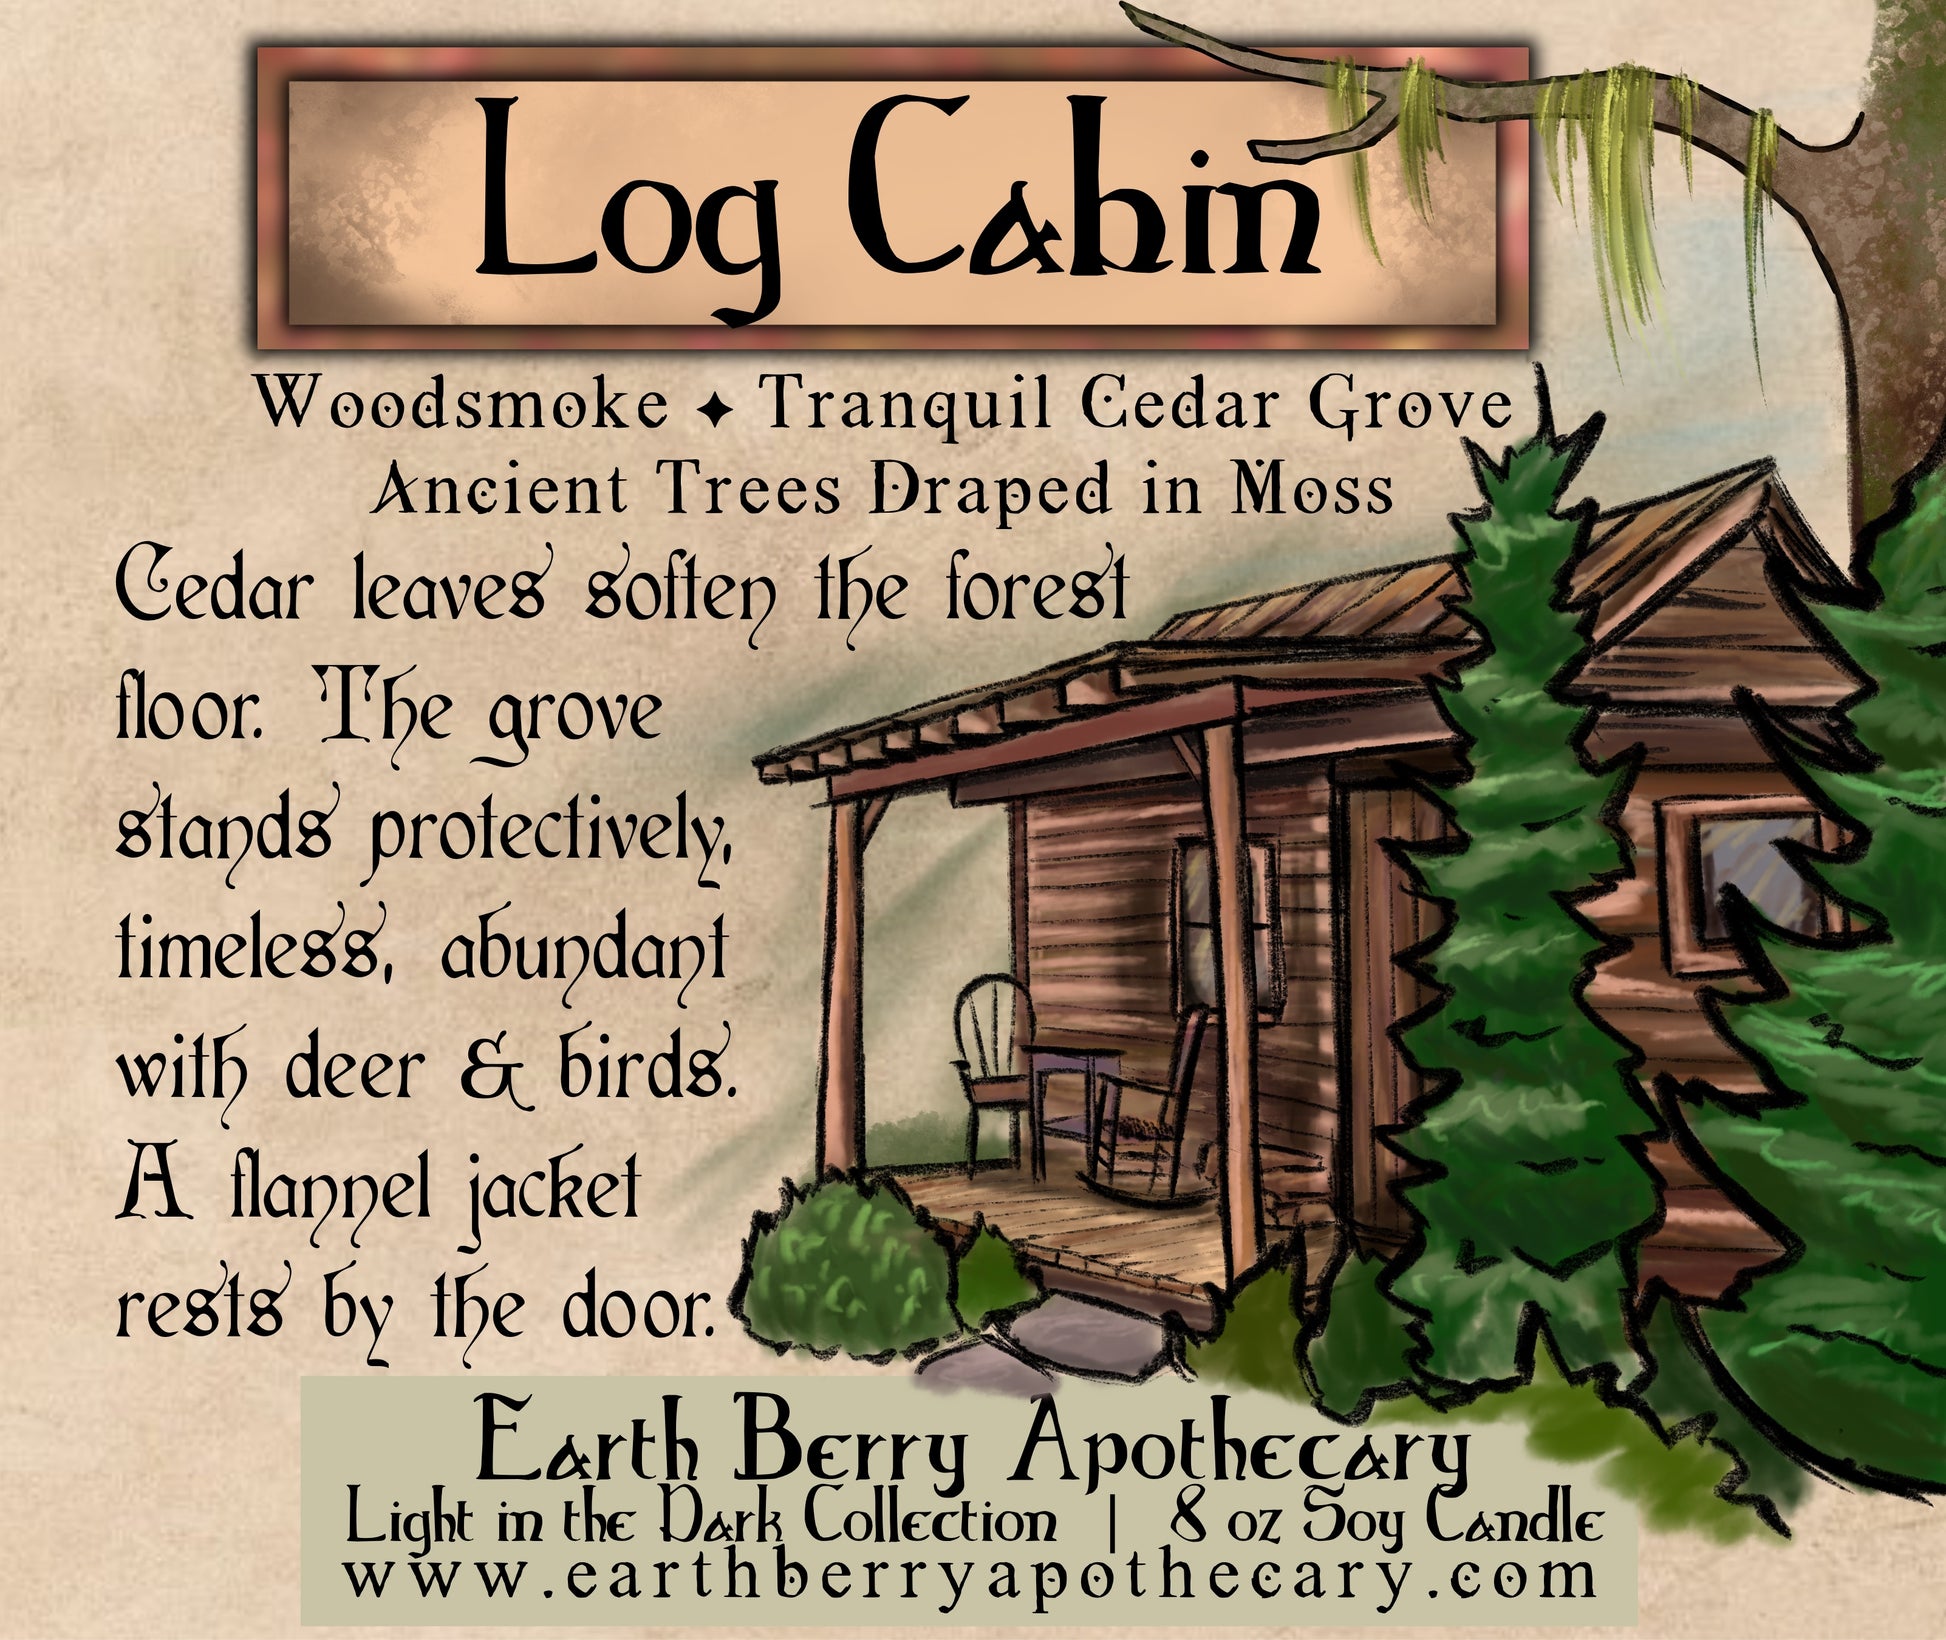 Log Cabin scented soy candle with cedar, woodsmoke, and moss scent. The label depicts a charming fishing cabin surrounded by cedar trees. Candles that are always clean burning, and nontoxic.